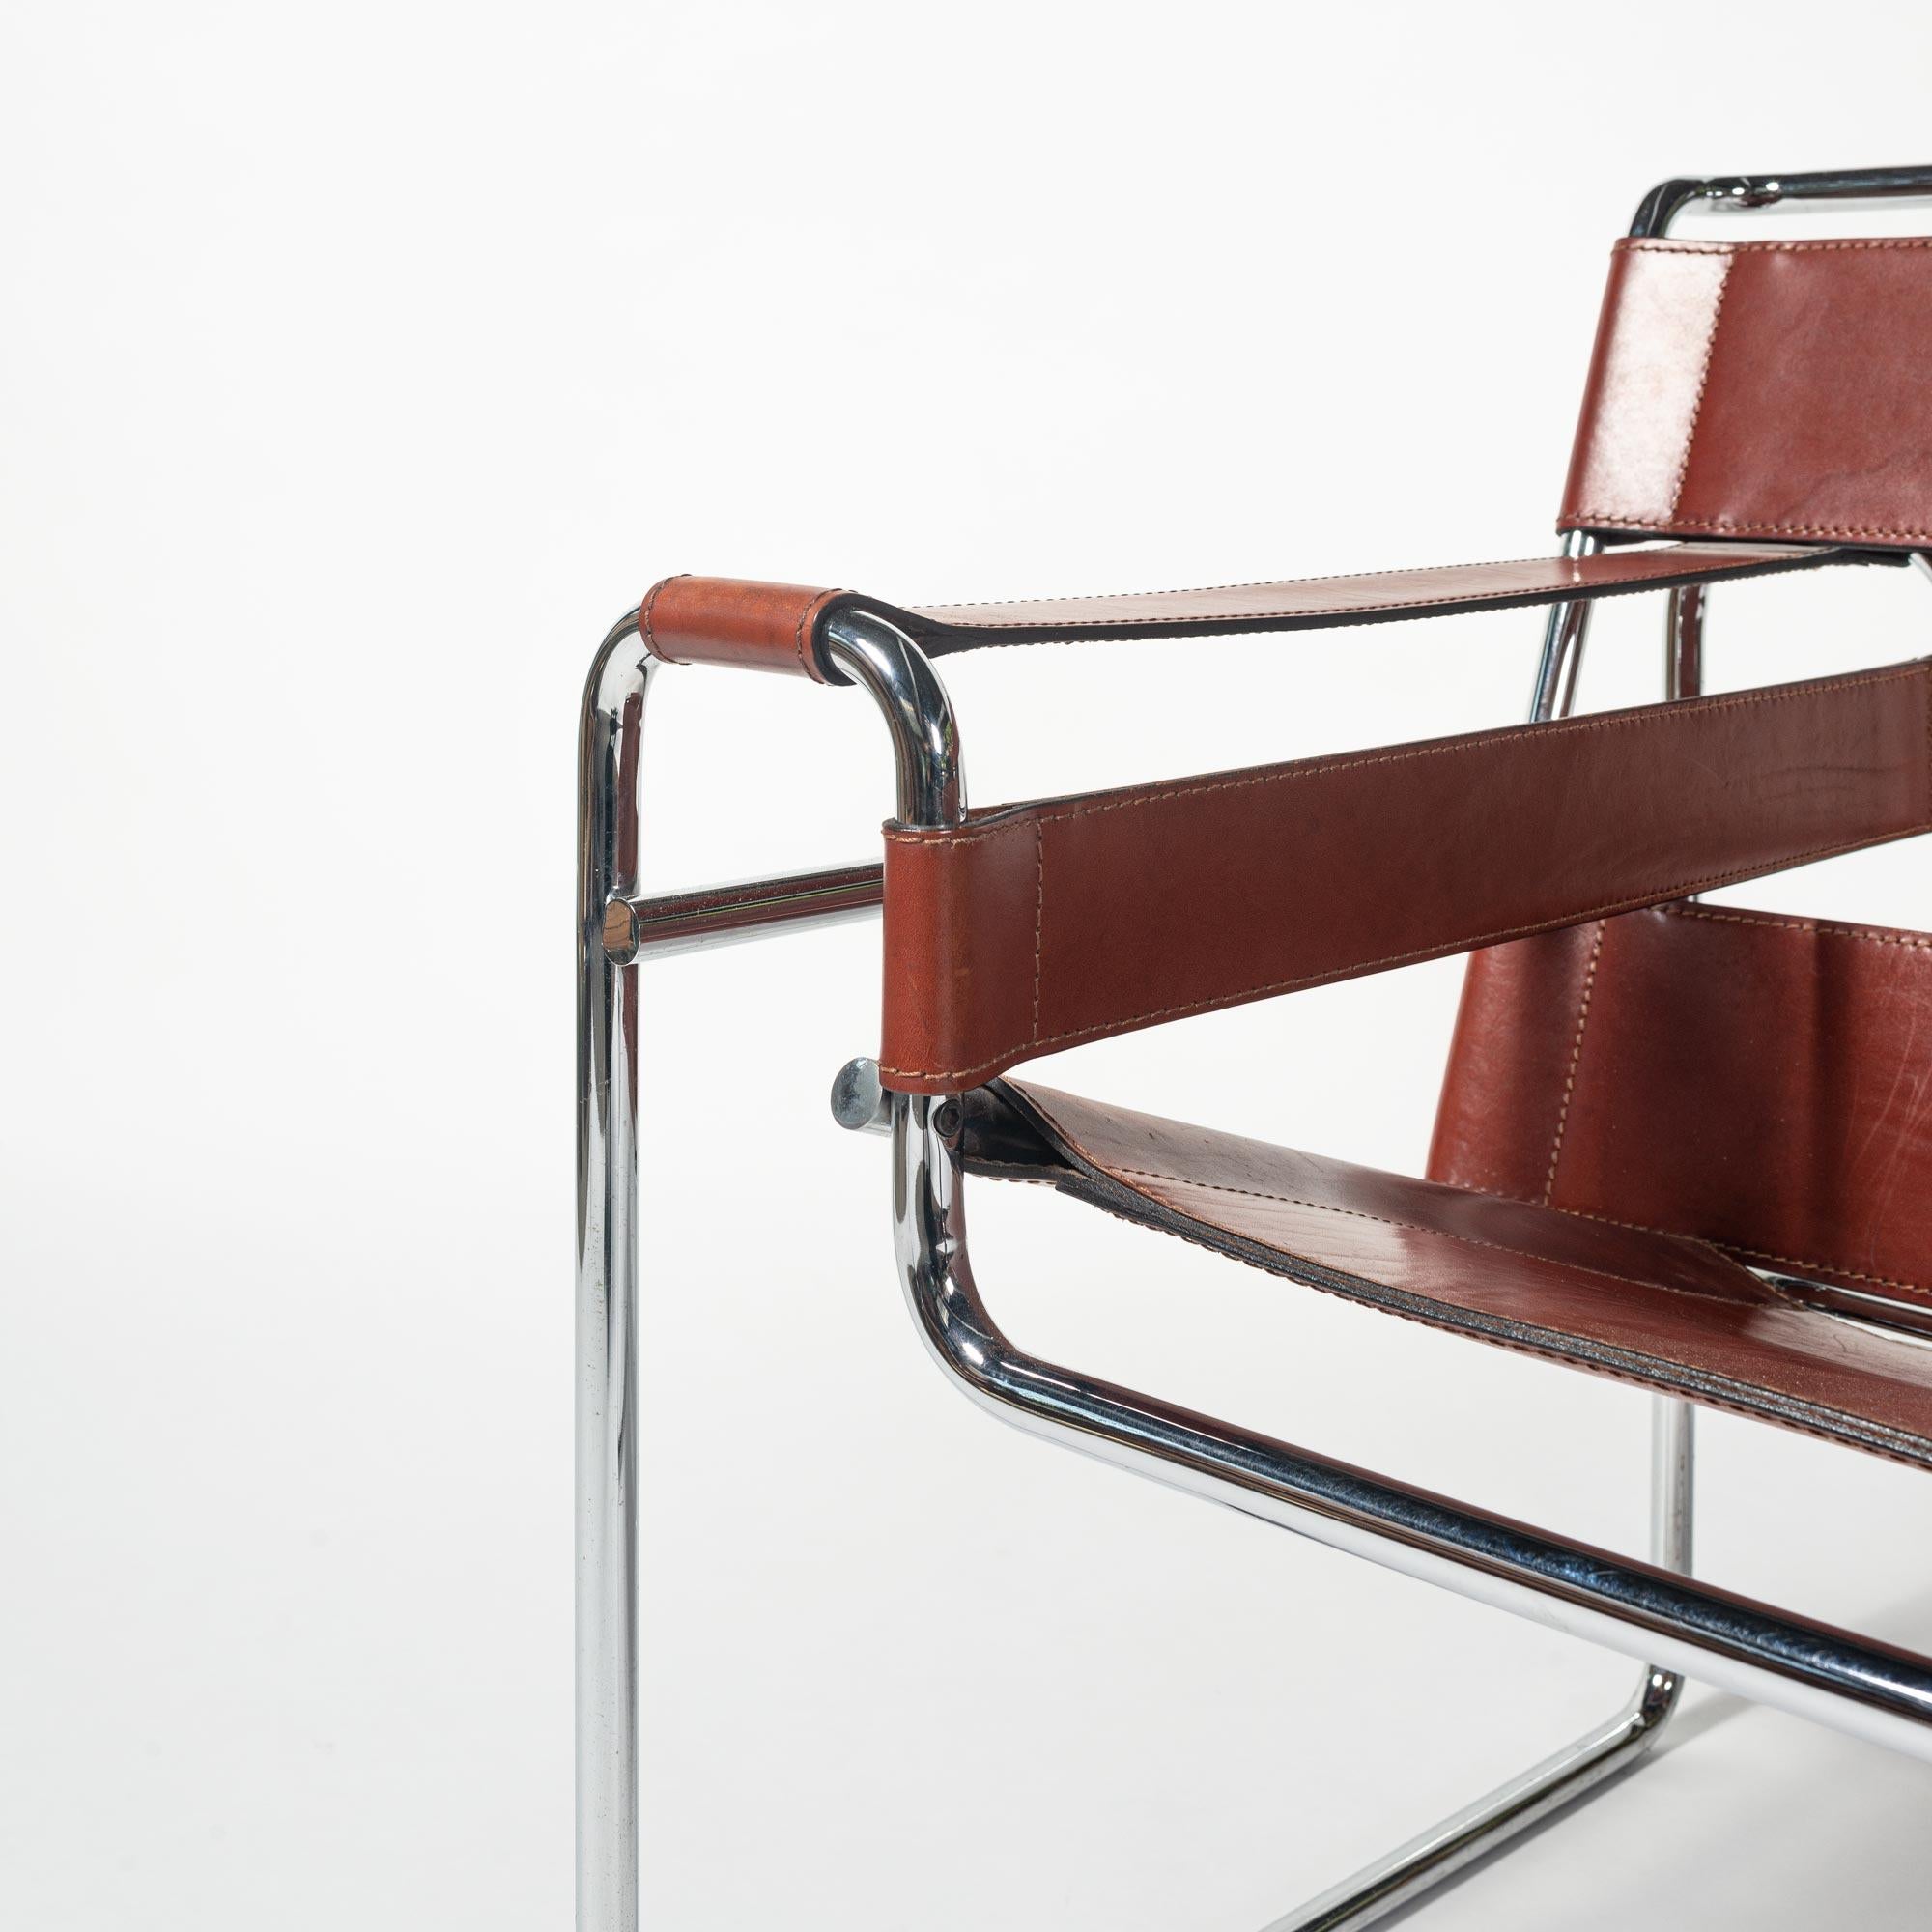 North American Marcel Breuer for Knoll Wassily Chair in Cognac Full Leather